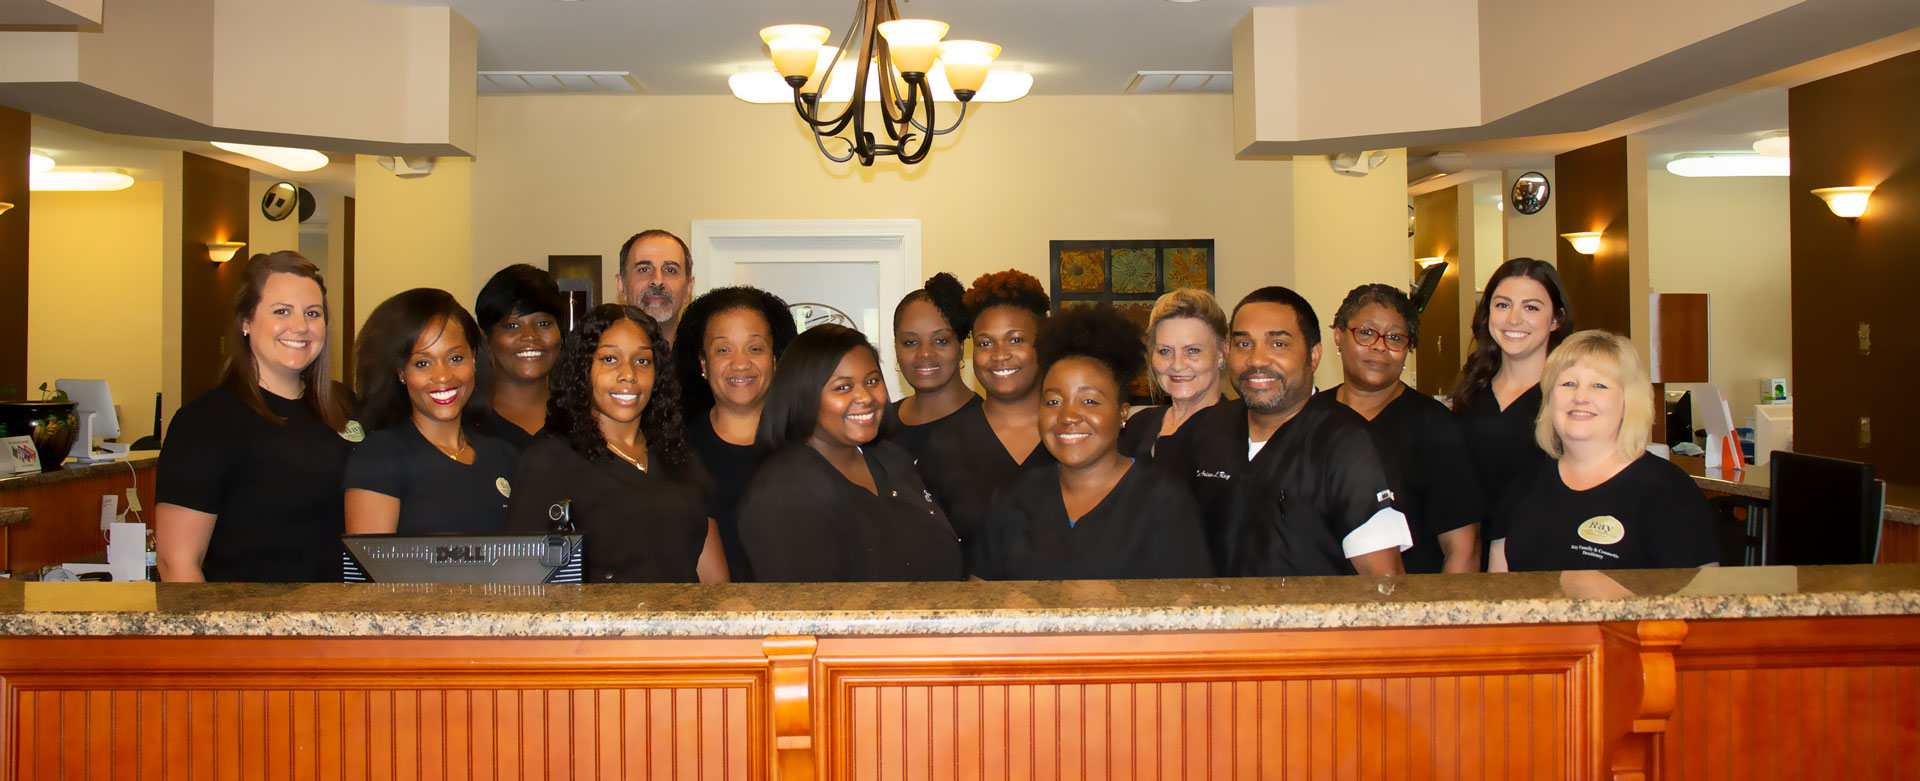 Photo Shoot with Ray Family and Cosmetic Dentistry Team